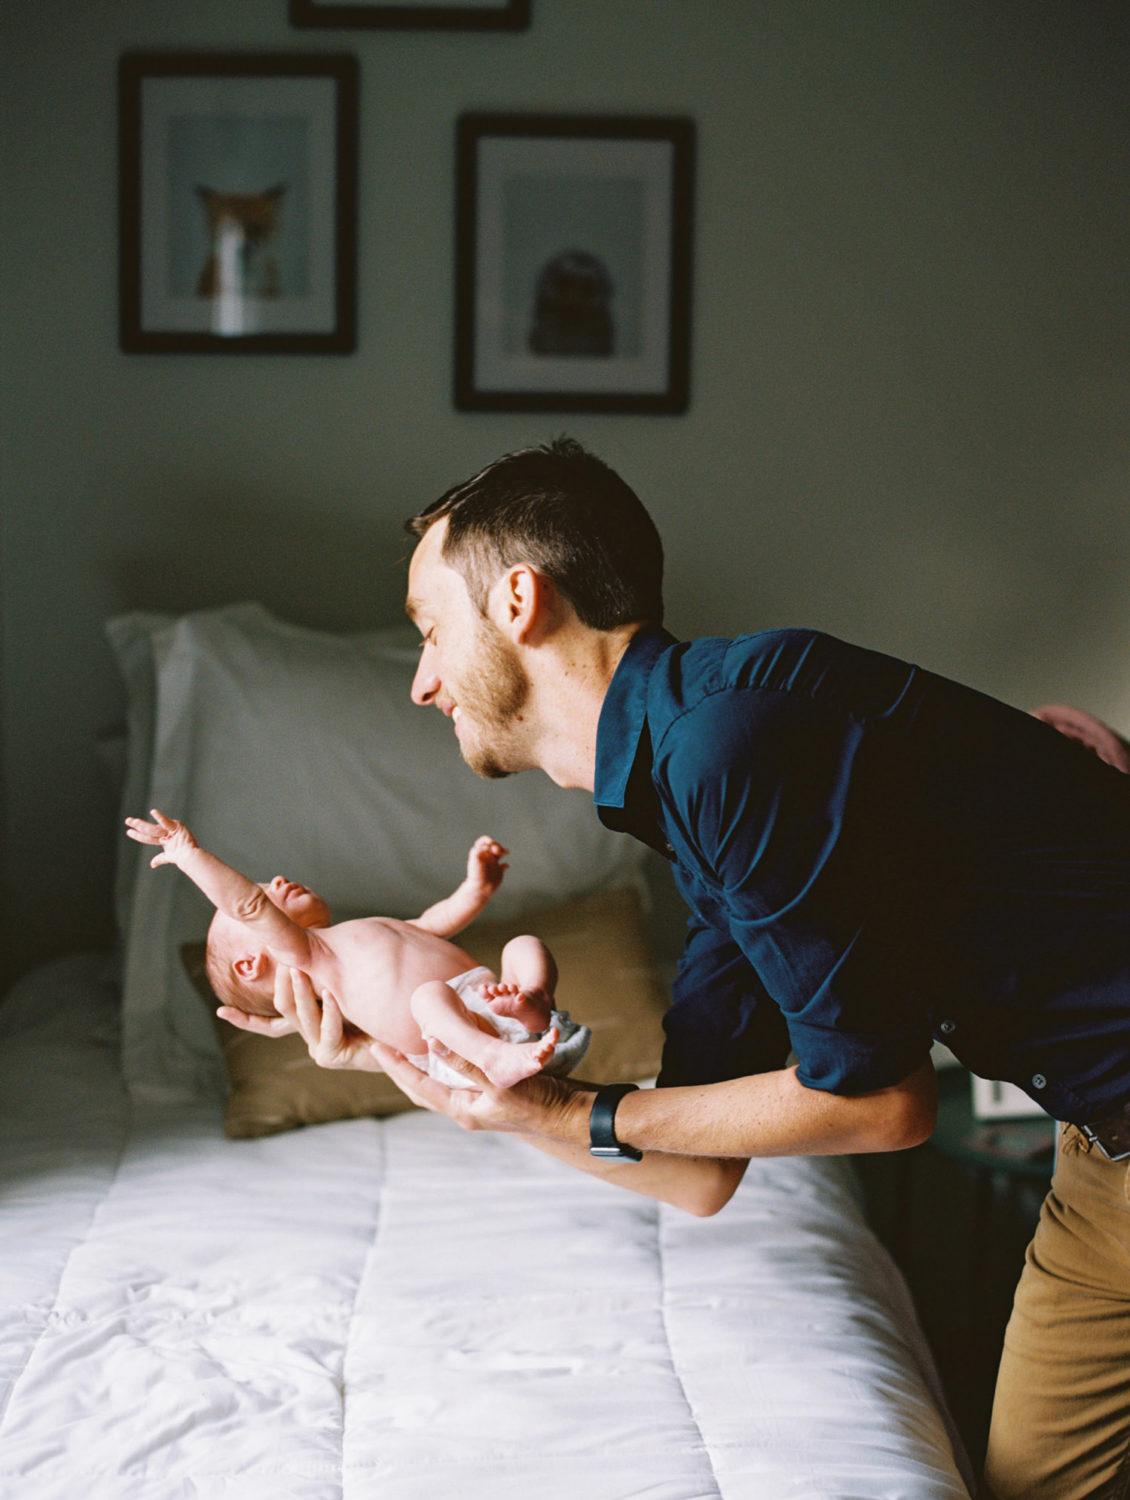 dad in dark blue shirt and tan pants smiling and gently laying newborn stretching its arms on a bed with white blanket.